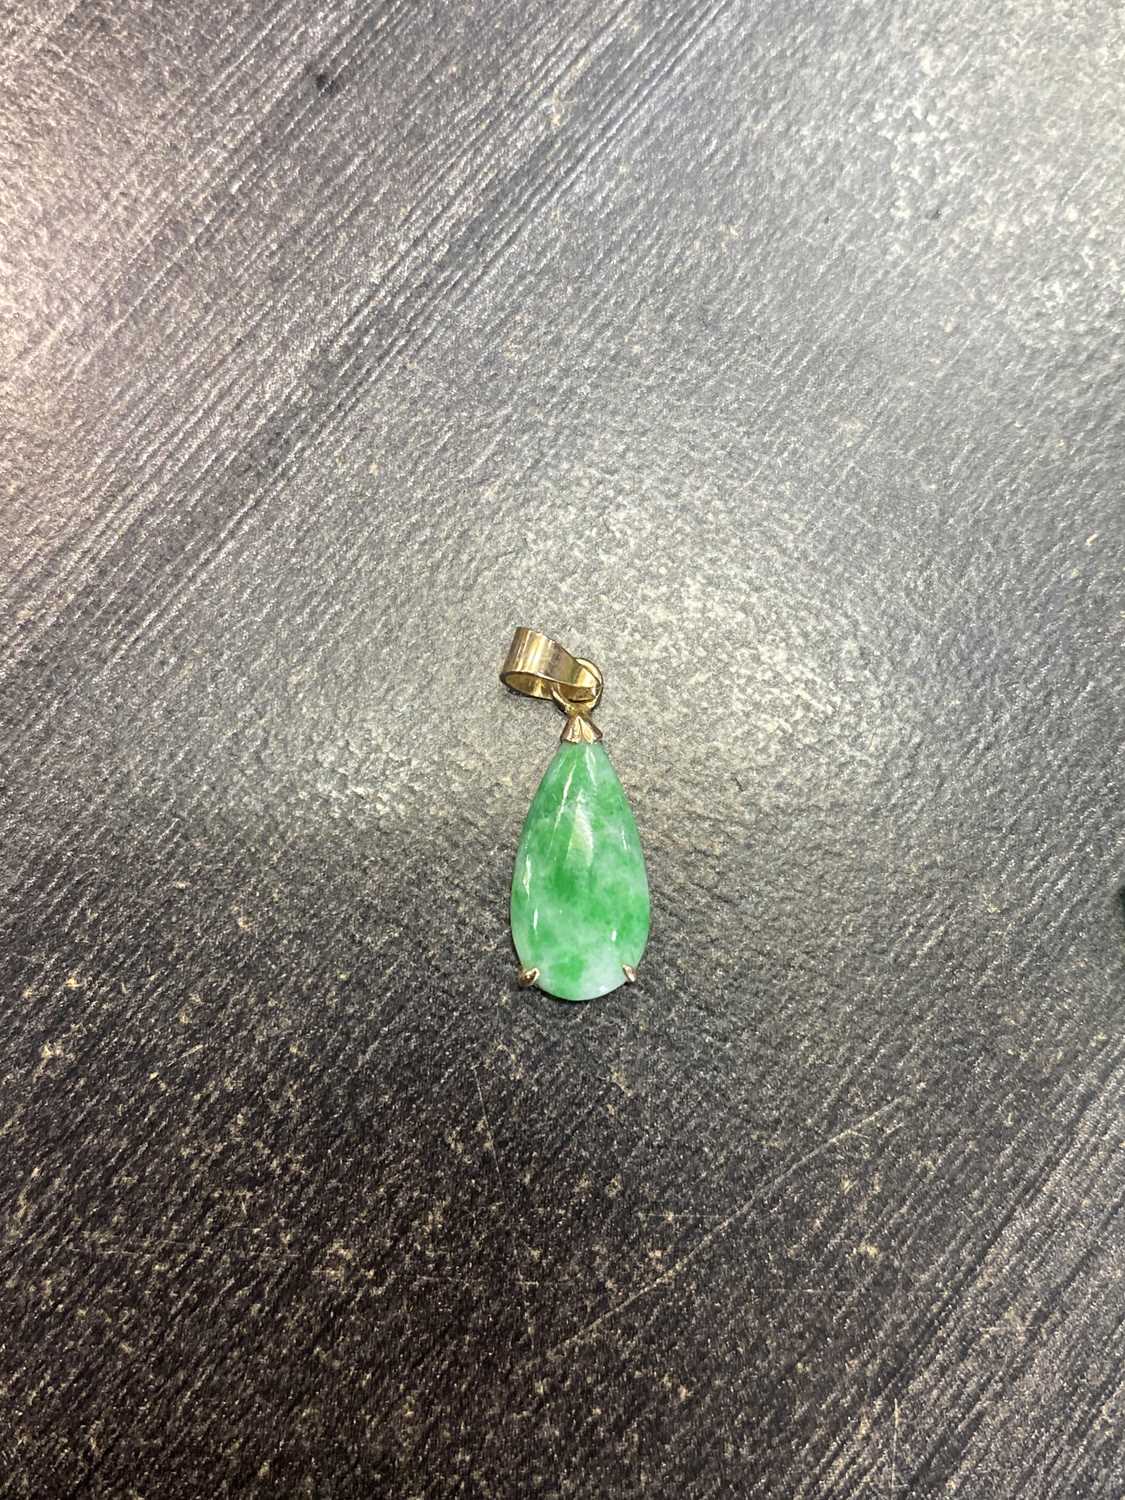 PAIR OF GREEN HARDSTONE AND DIAMOND EARRINGS AND A PENDANT, - Image 6 of 6